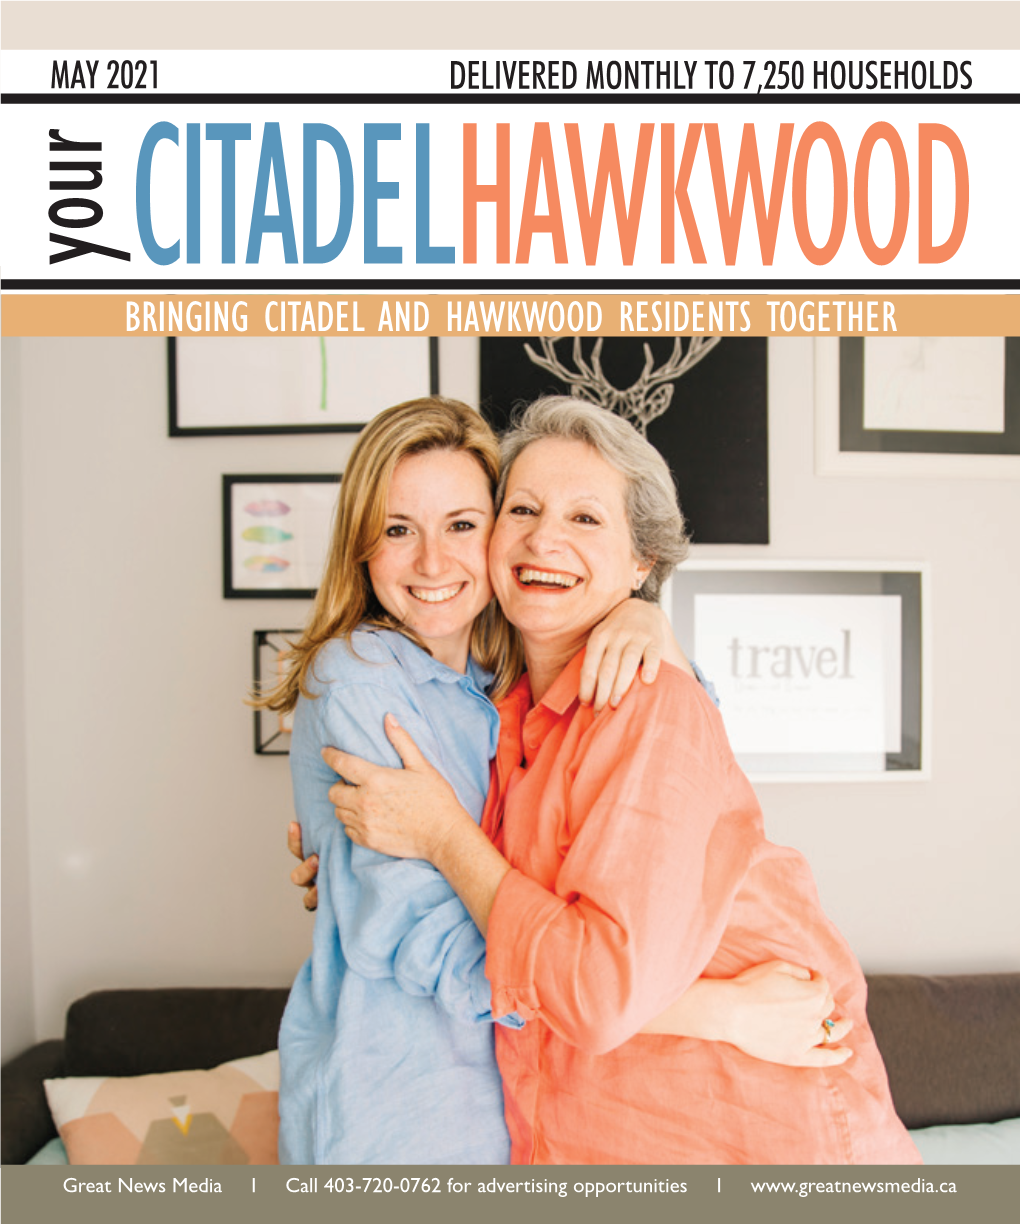 BRINGING CITADEL and HAWKWOOD RESIDENTSTOGETHER Your DELIVERED MONTHLY to 7,250HOUSEHOLDS